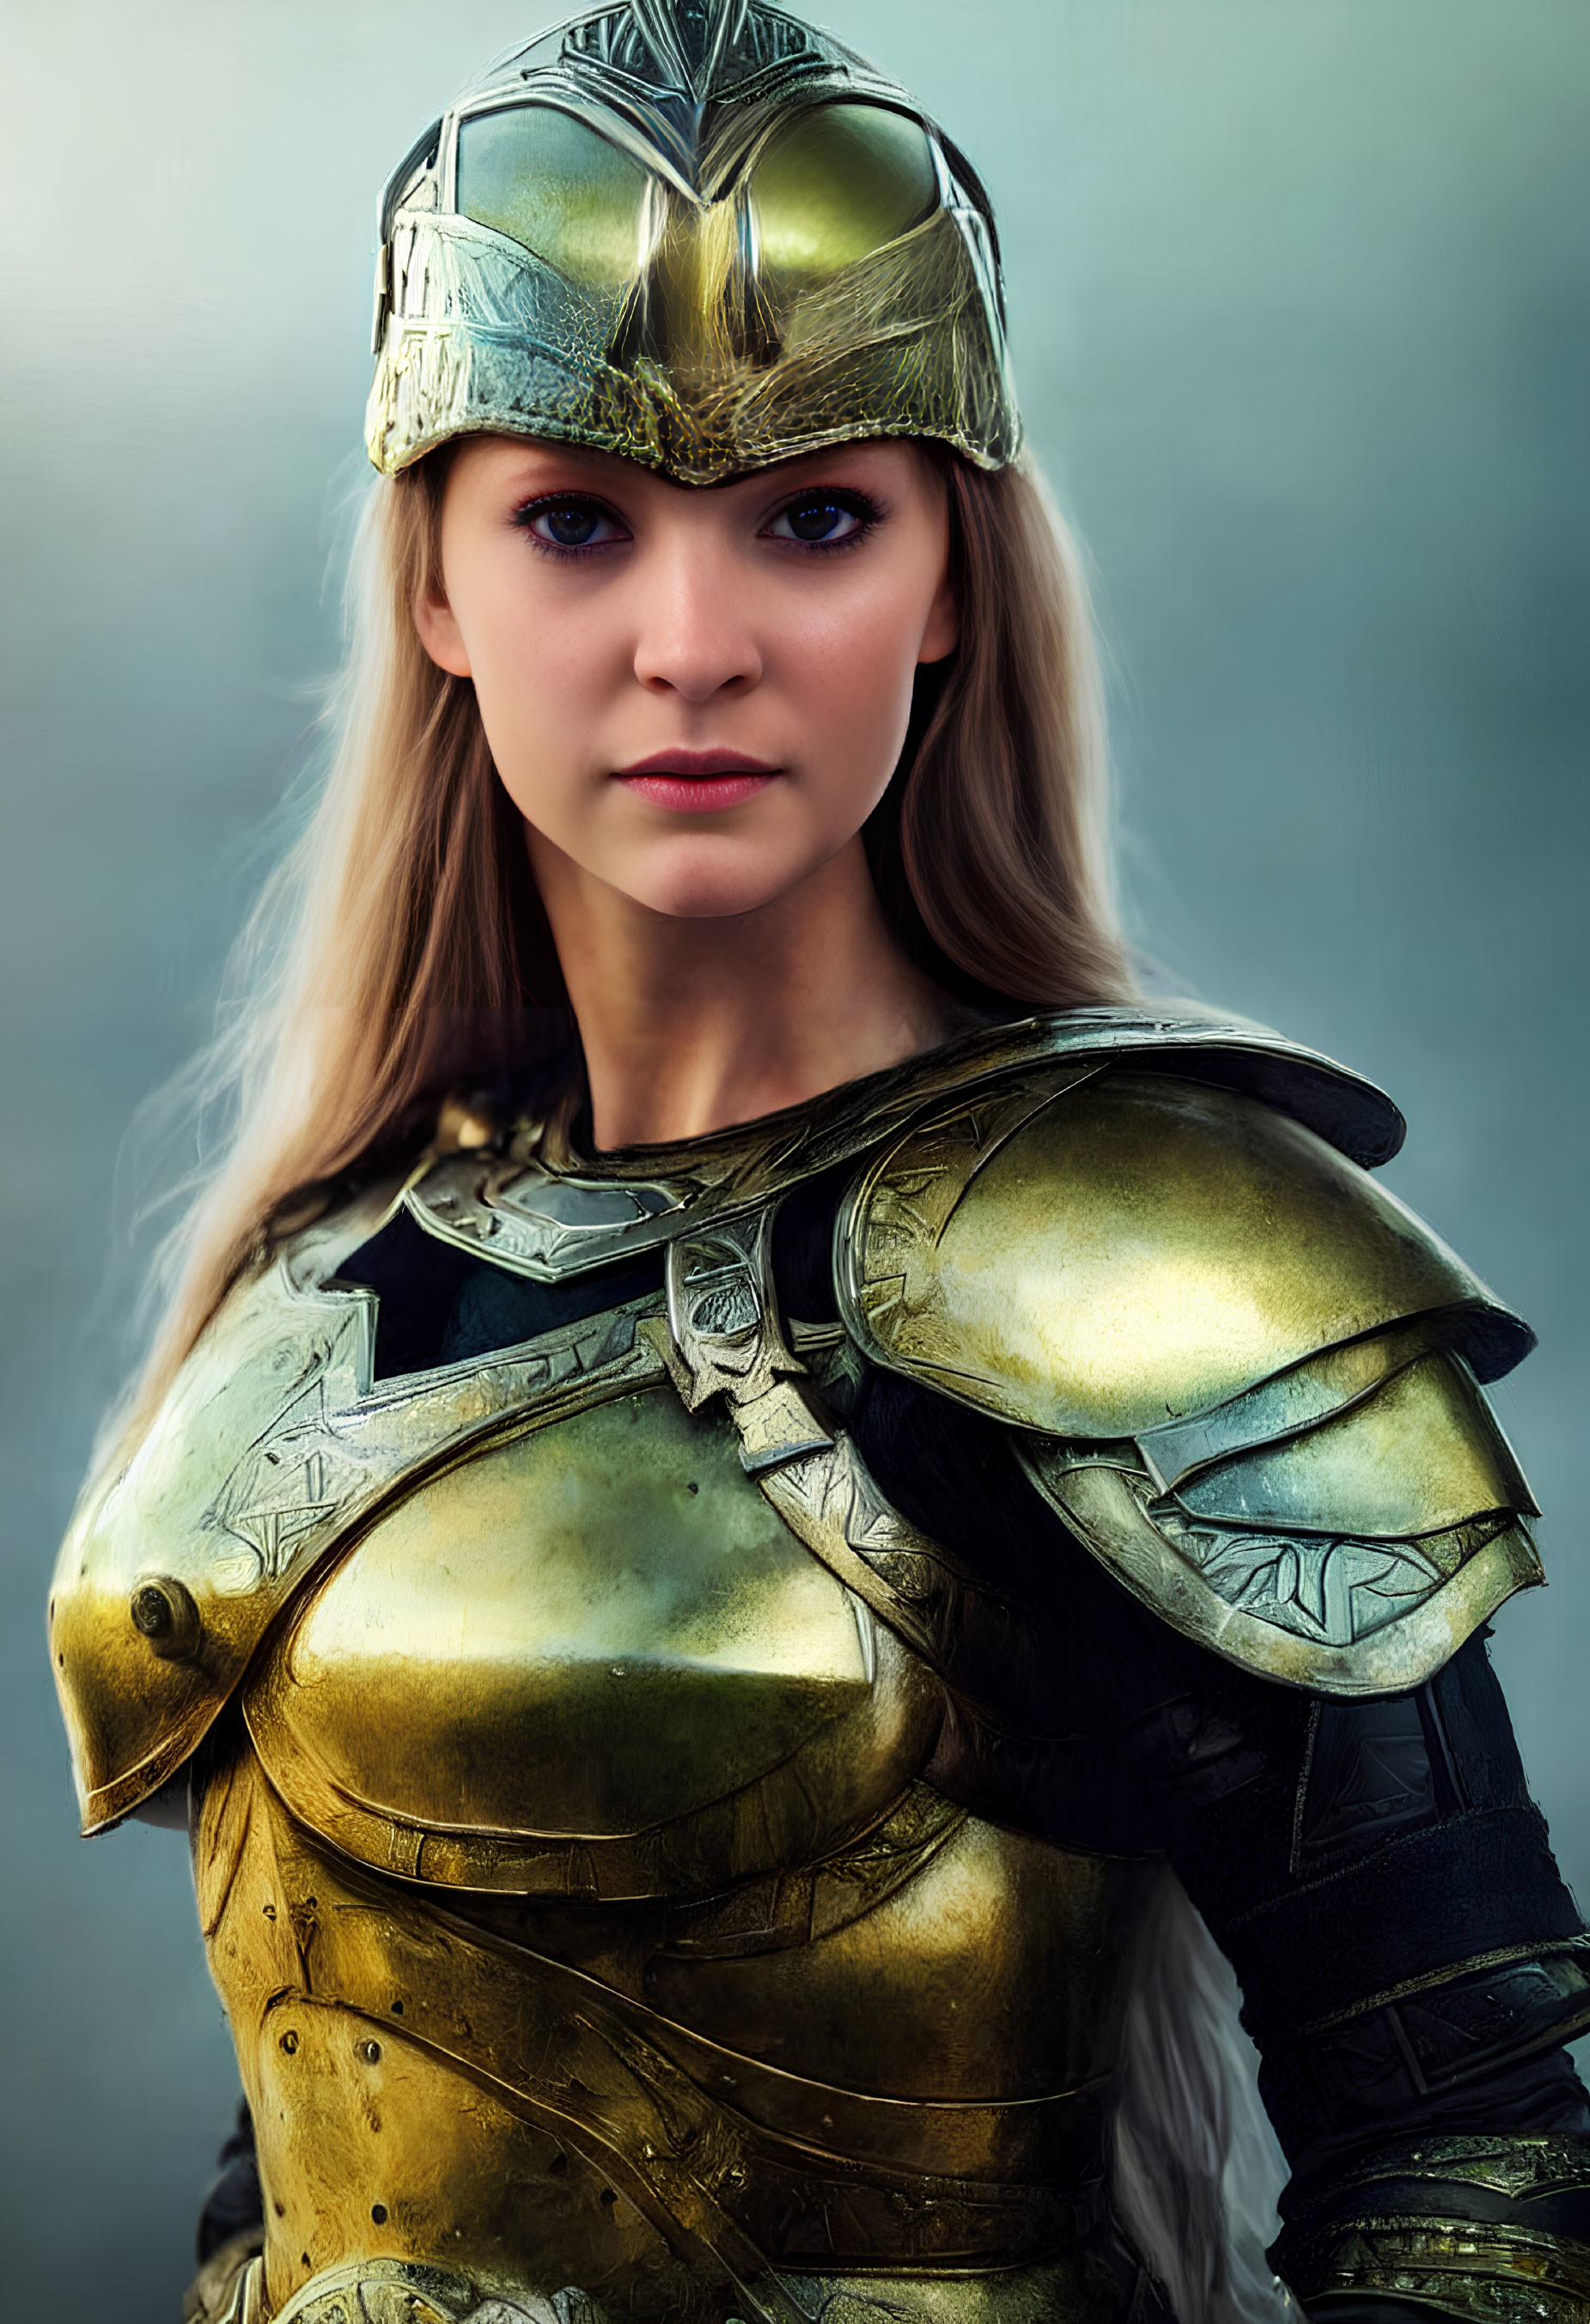 Detailed Golden Armor Woman in Stern Expression against Blurred Background